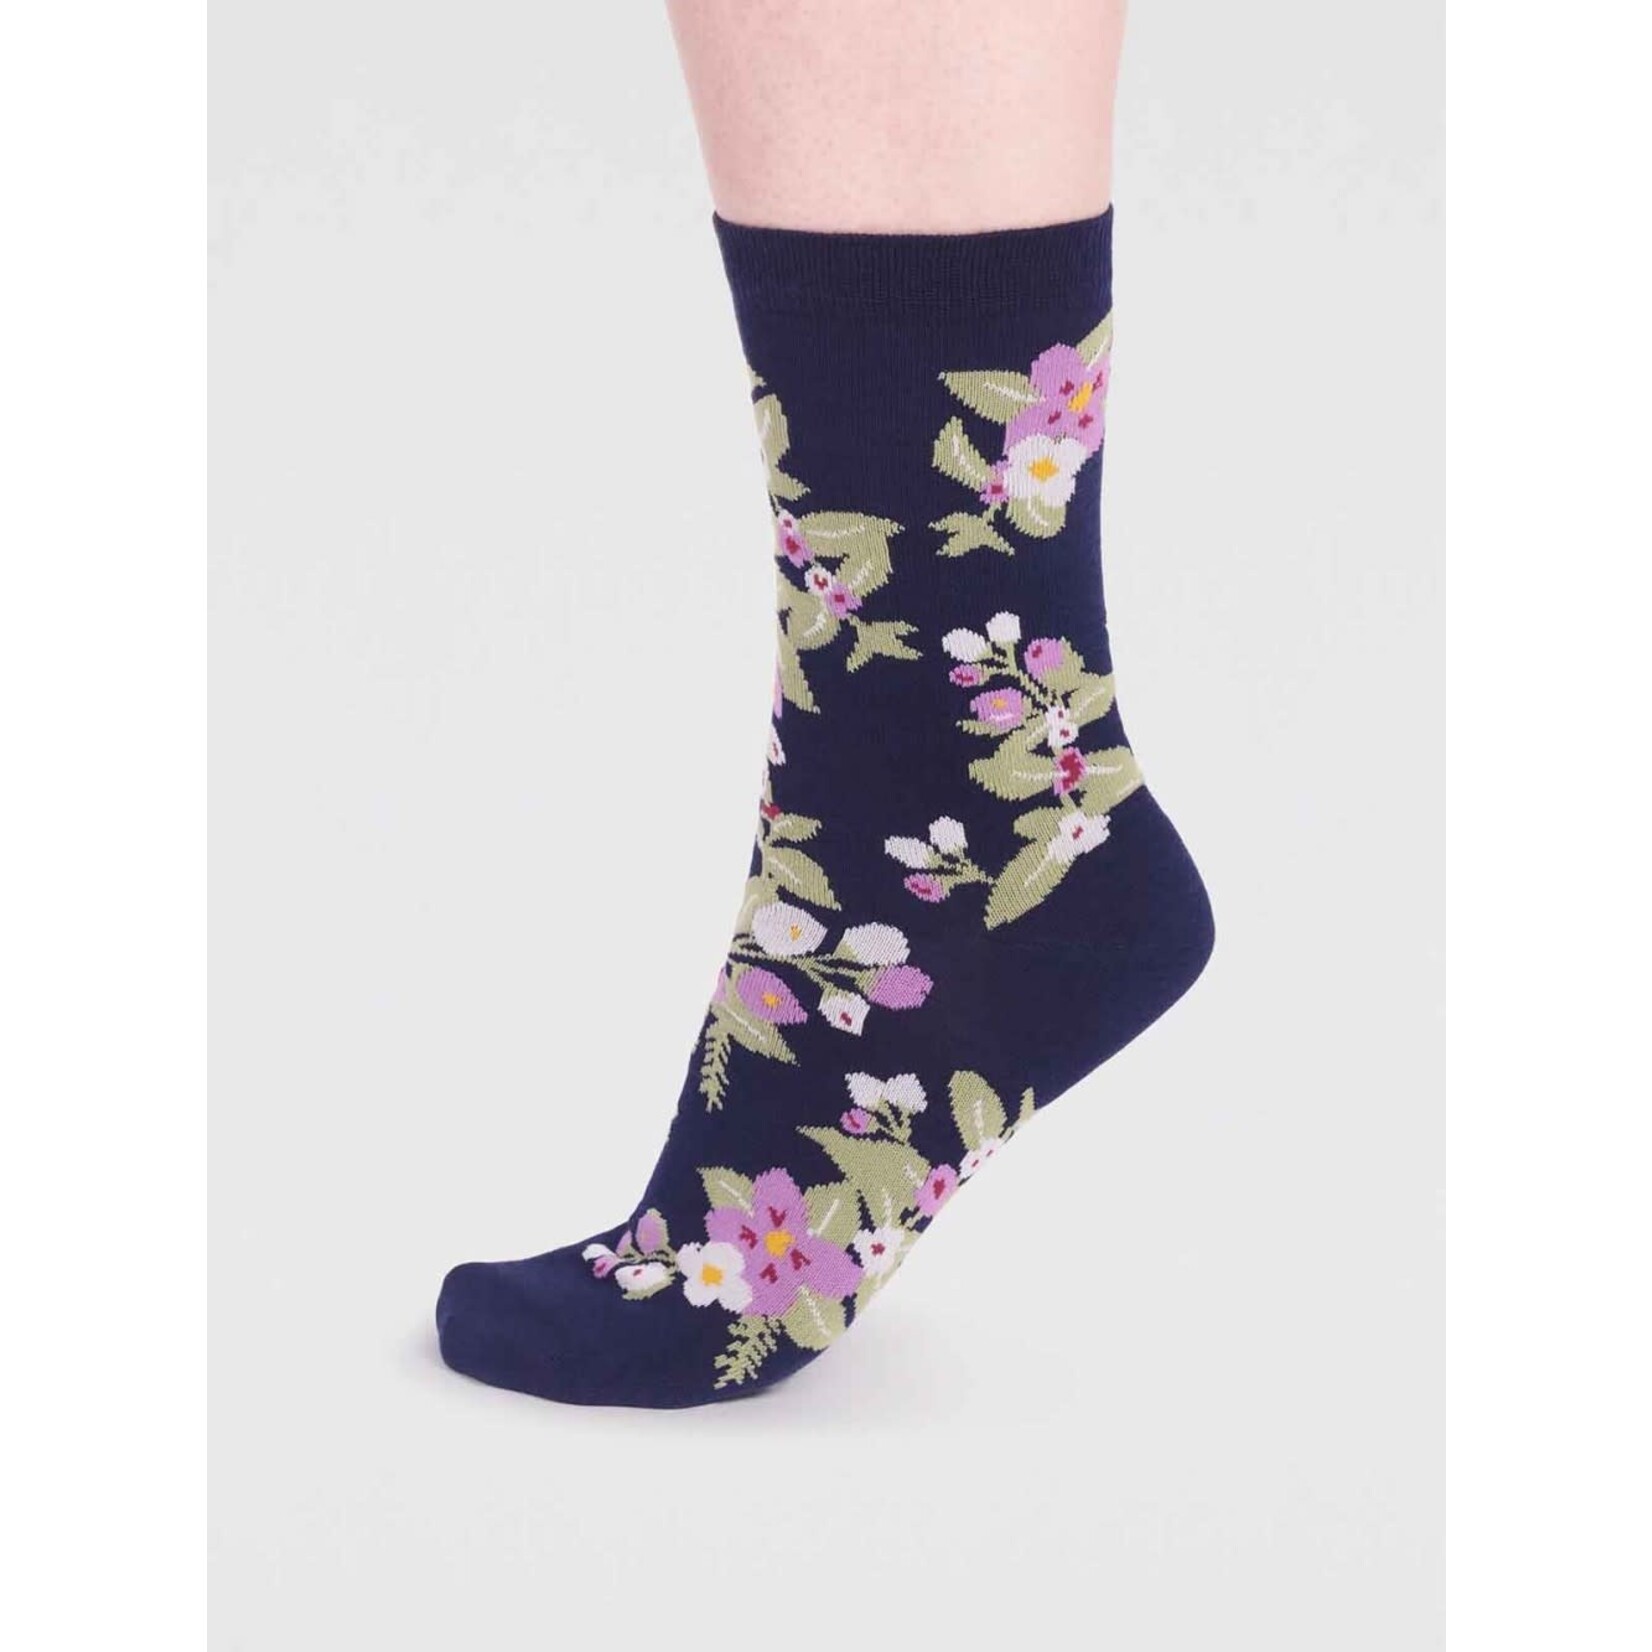 Thought Socks - Arya Floral